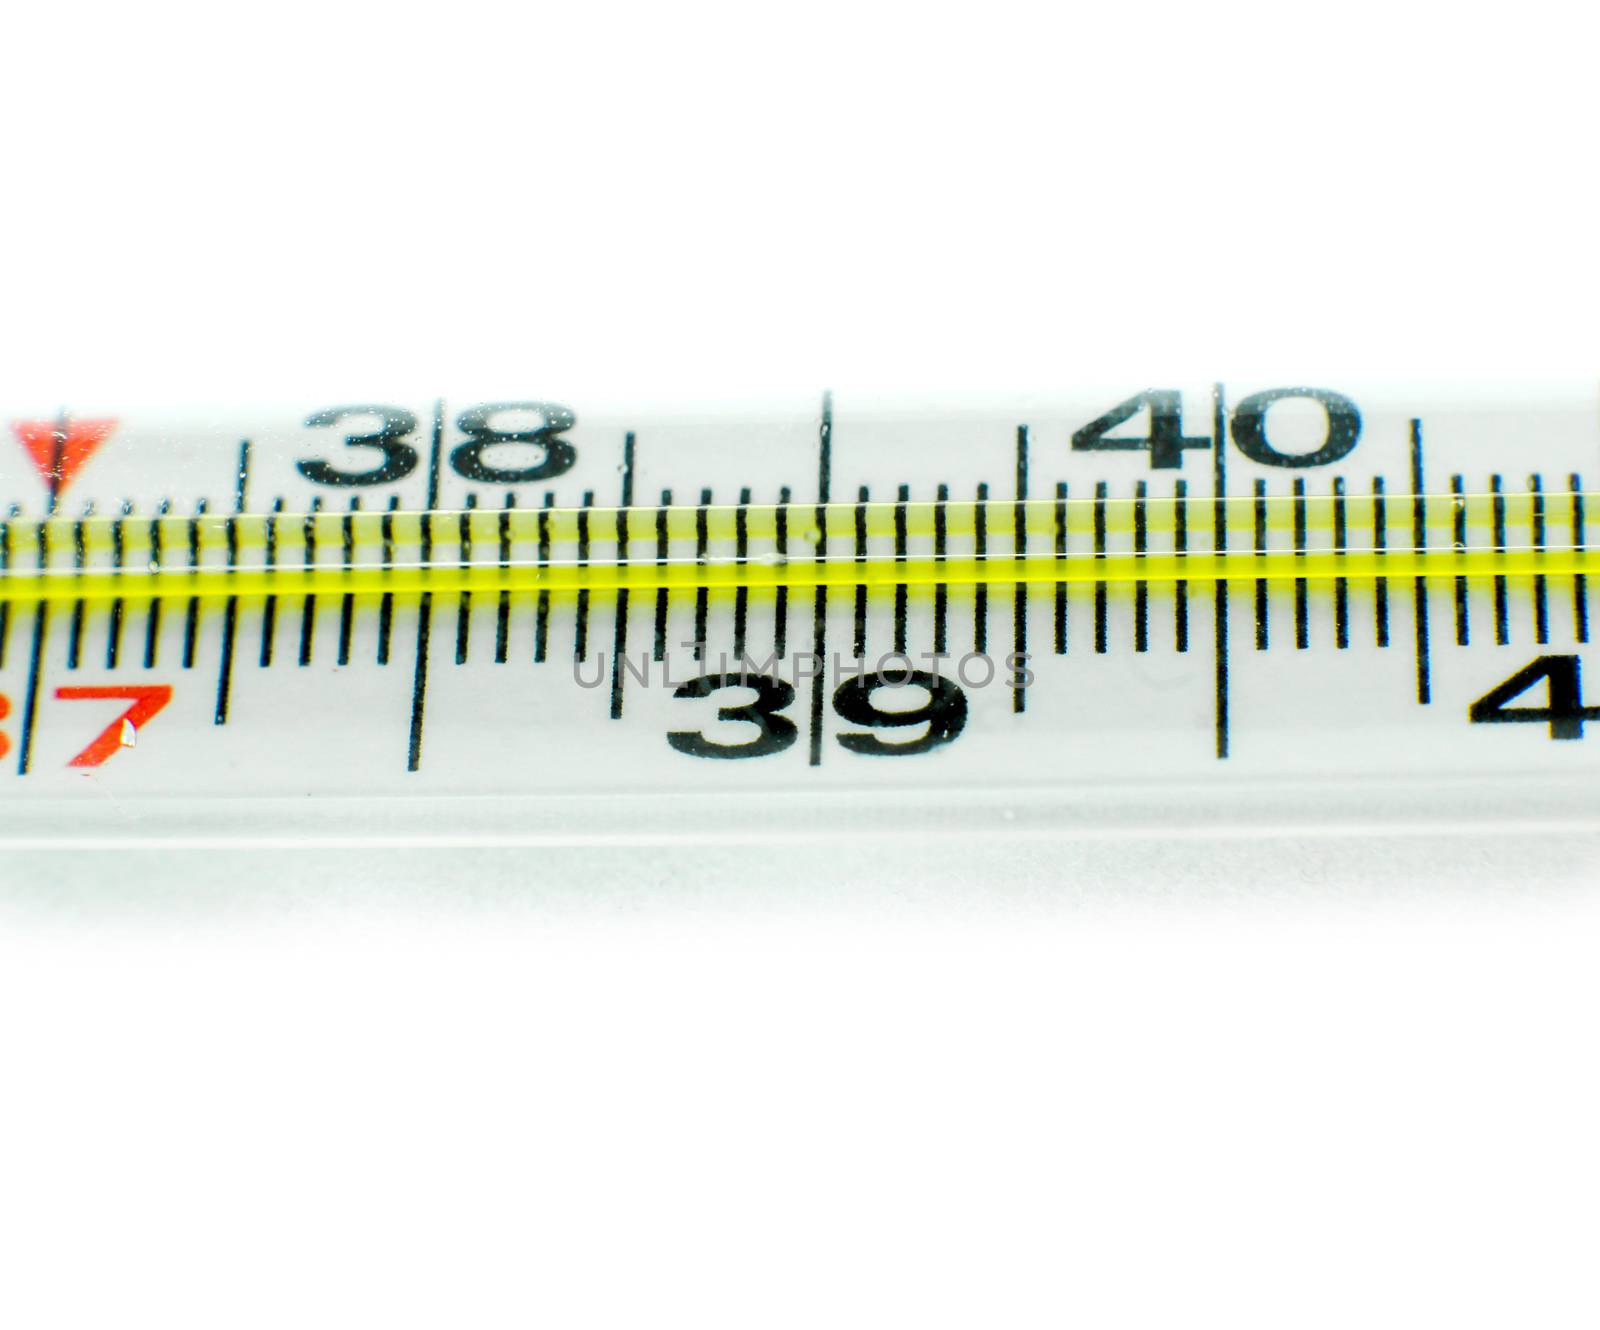 Medical thermometer isolated on the white background. For your commercial and editorial use.